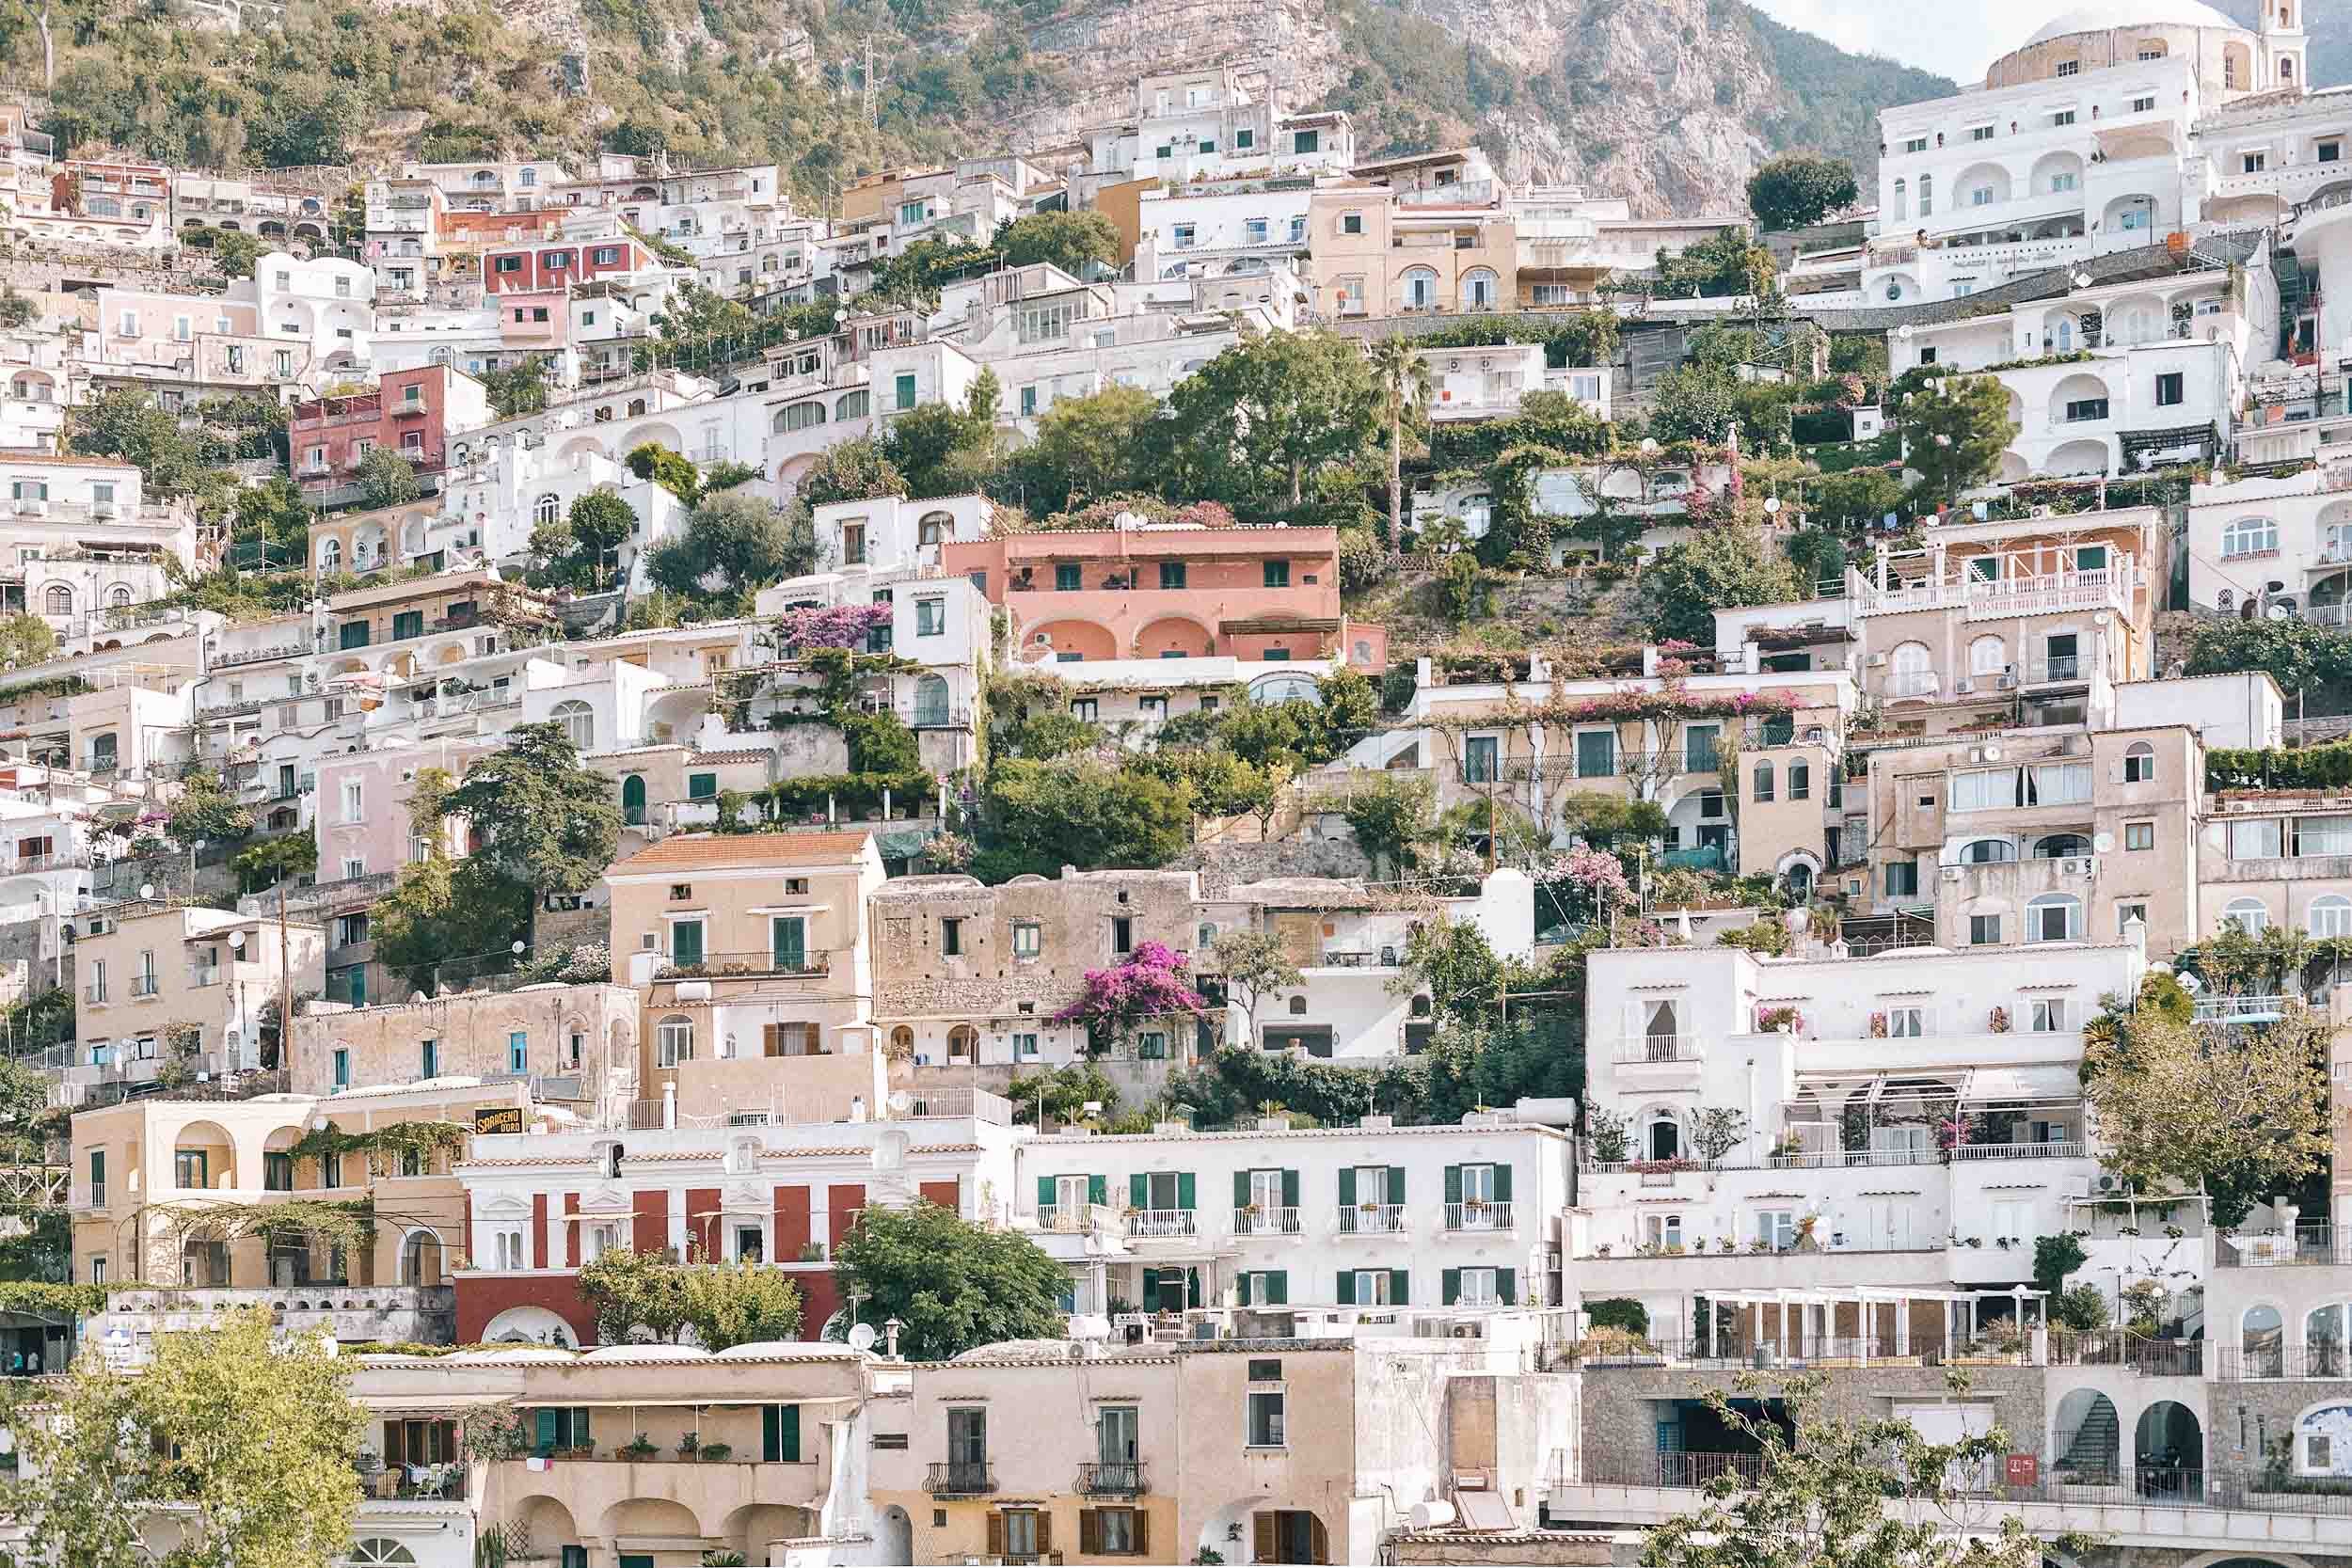 Things to do in Positano: Spend time in the less touristy area of Positano, Fornillo